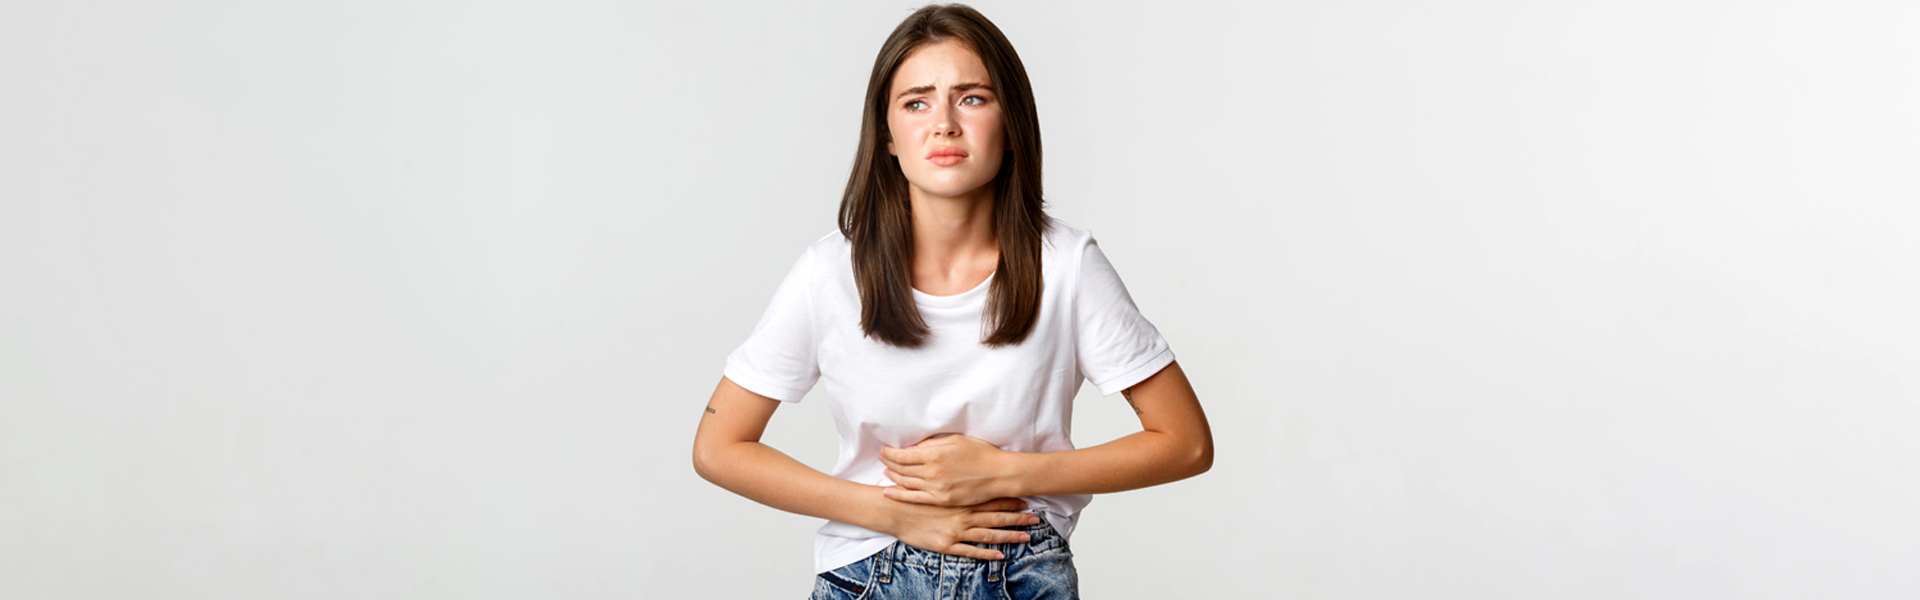 Things You Need to Know About Appendicitis